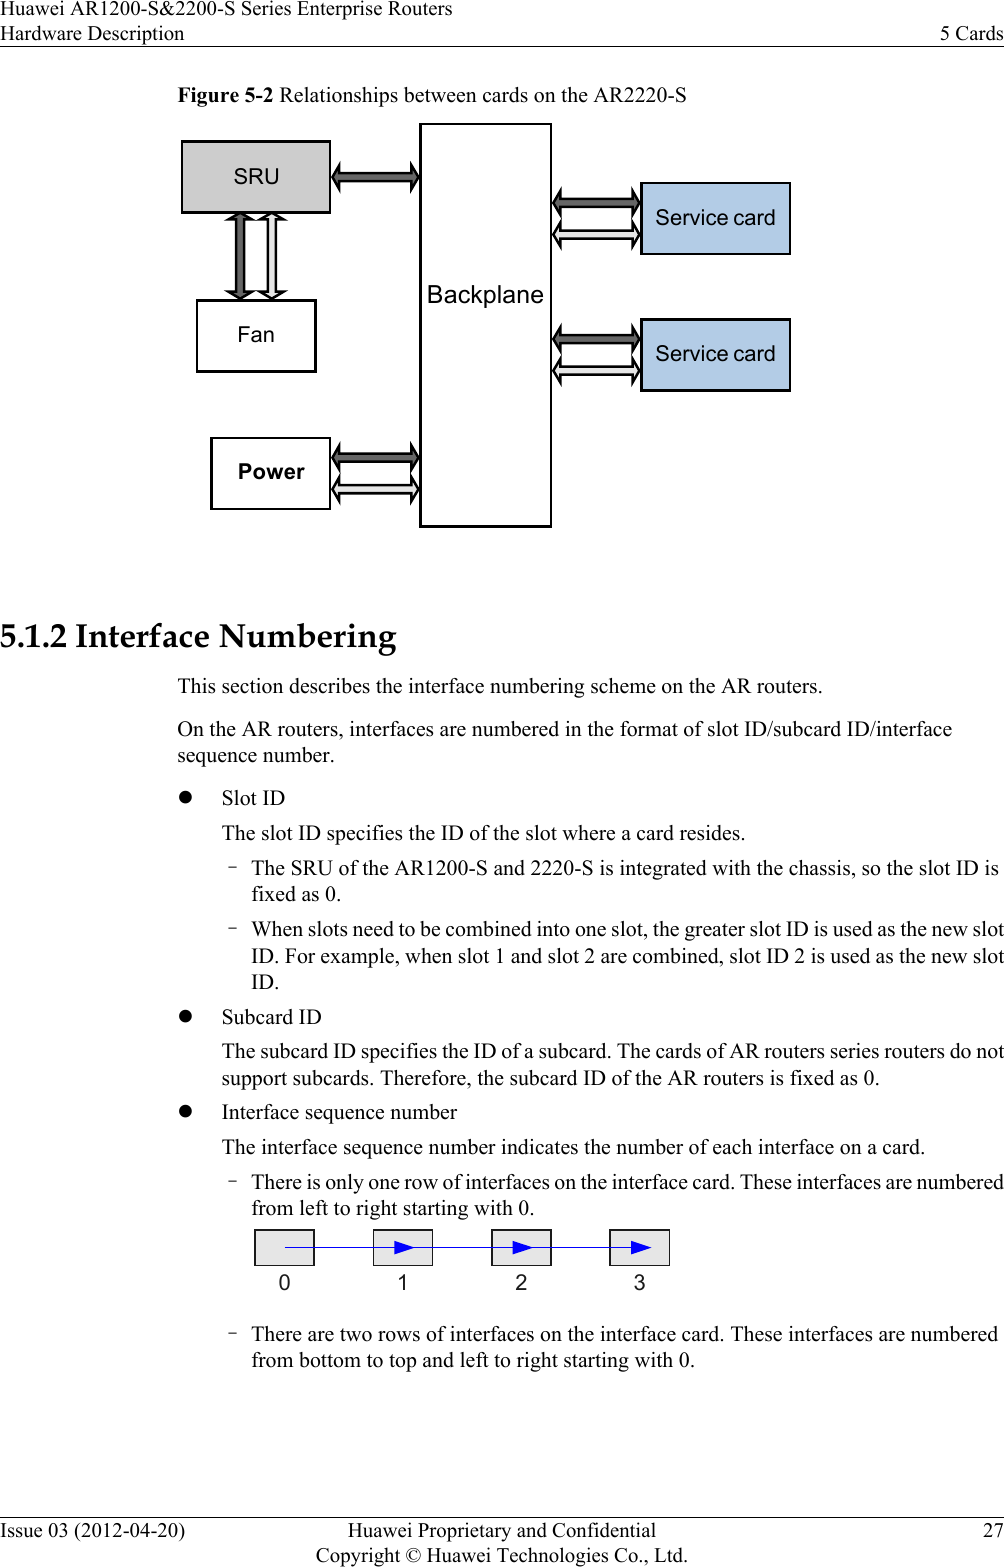 Figure 5-2 Relationships between cards on the AR2220-SPowerBackplaneSRUFanService cardService card 5.1.2 Interface NumberingThis section describes the interface numbering scheme on the AR routers.On the AR routers, interfaces are numbered in the format of slot ID/subcard ID/interfacesequence number.lSlot IDThe slot ID specifies the ID of the slot where a card resides.–The SRU of the AR1200-S and 2220-S is integrated with the chassis, so the slot ID isfixed as 0.–When slots need to be combined into one slot, the greater slot ID is used as the new slotID. For example, when slot 1 and slot 2 are combined, slot ID 2 is used as the new slotID.lSubcard IDThe subcard ID specifies the ID of a subcard. The cards of AR routers series routers do notsupport subcards. Therefore, the subcard ID of the AR routers is fixed as 0.lInterface sequence numberThe interface sequence number indicates the number of each interface on a card.–There is only one row of interfaces on the interface card. These interfaces are numberedfrom left to right starting with 0.0 1 2 3–There are two rows of interfaces on the interface card. These interfaces are numberedfrom bottom to top and left to right starting with 0.Huawei AR1200-S&amp;2200-S Series Enterprise RoutersHardware Description 5 CardsIssue 03 (2012-04-20) Huawei Proprietary and ConfidentialCopyright © Huawei Technologies Co., Ltd.27